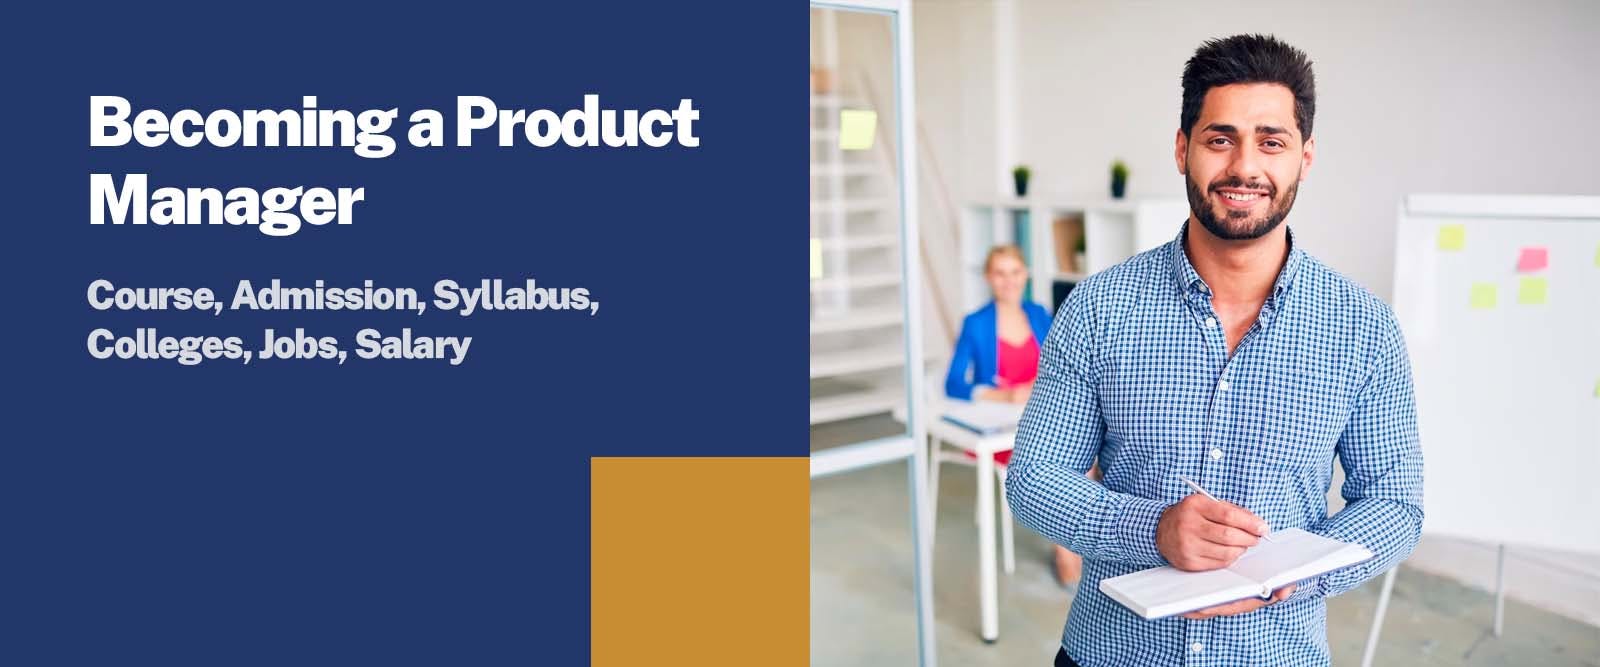 Becoming a Product Manager: Course, Admission, Syllabus, Colleges, Jobs, Salary